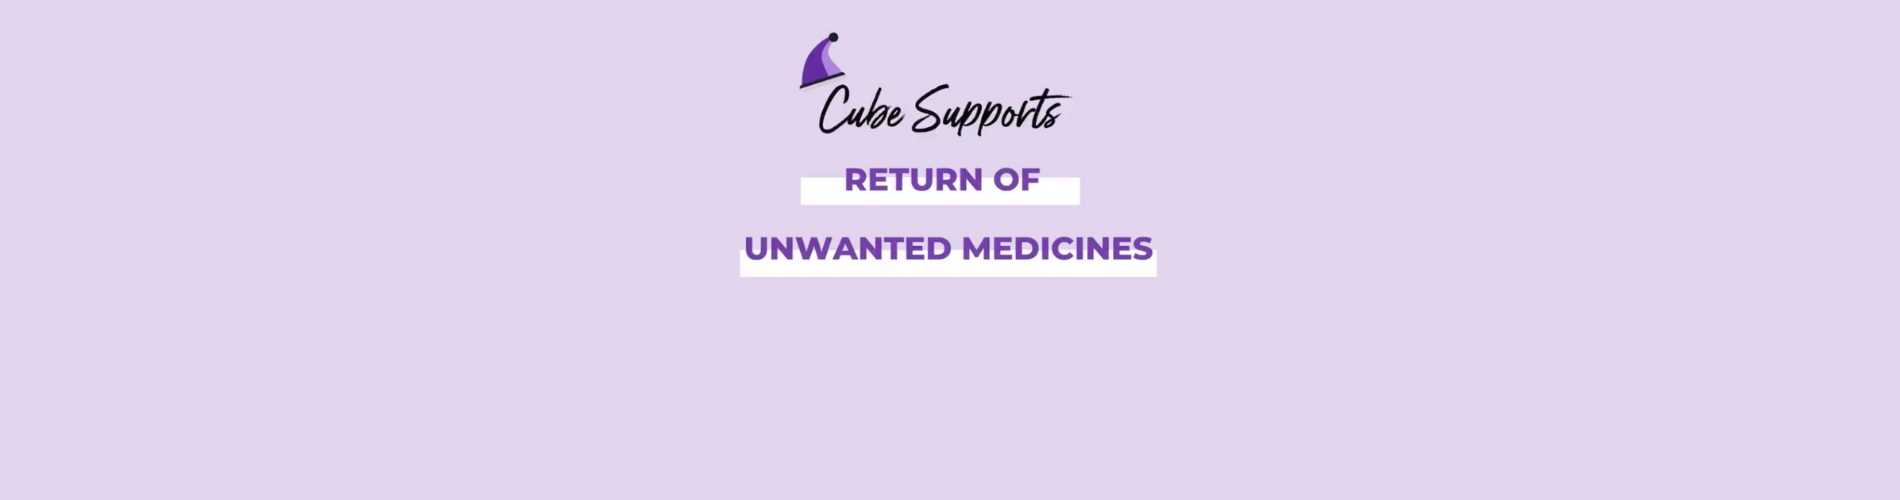 Cube Supports Return of Unwanted Medicines